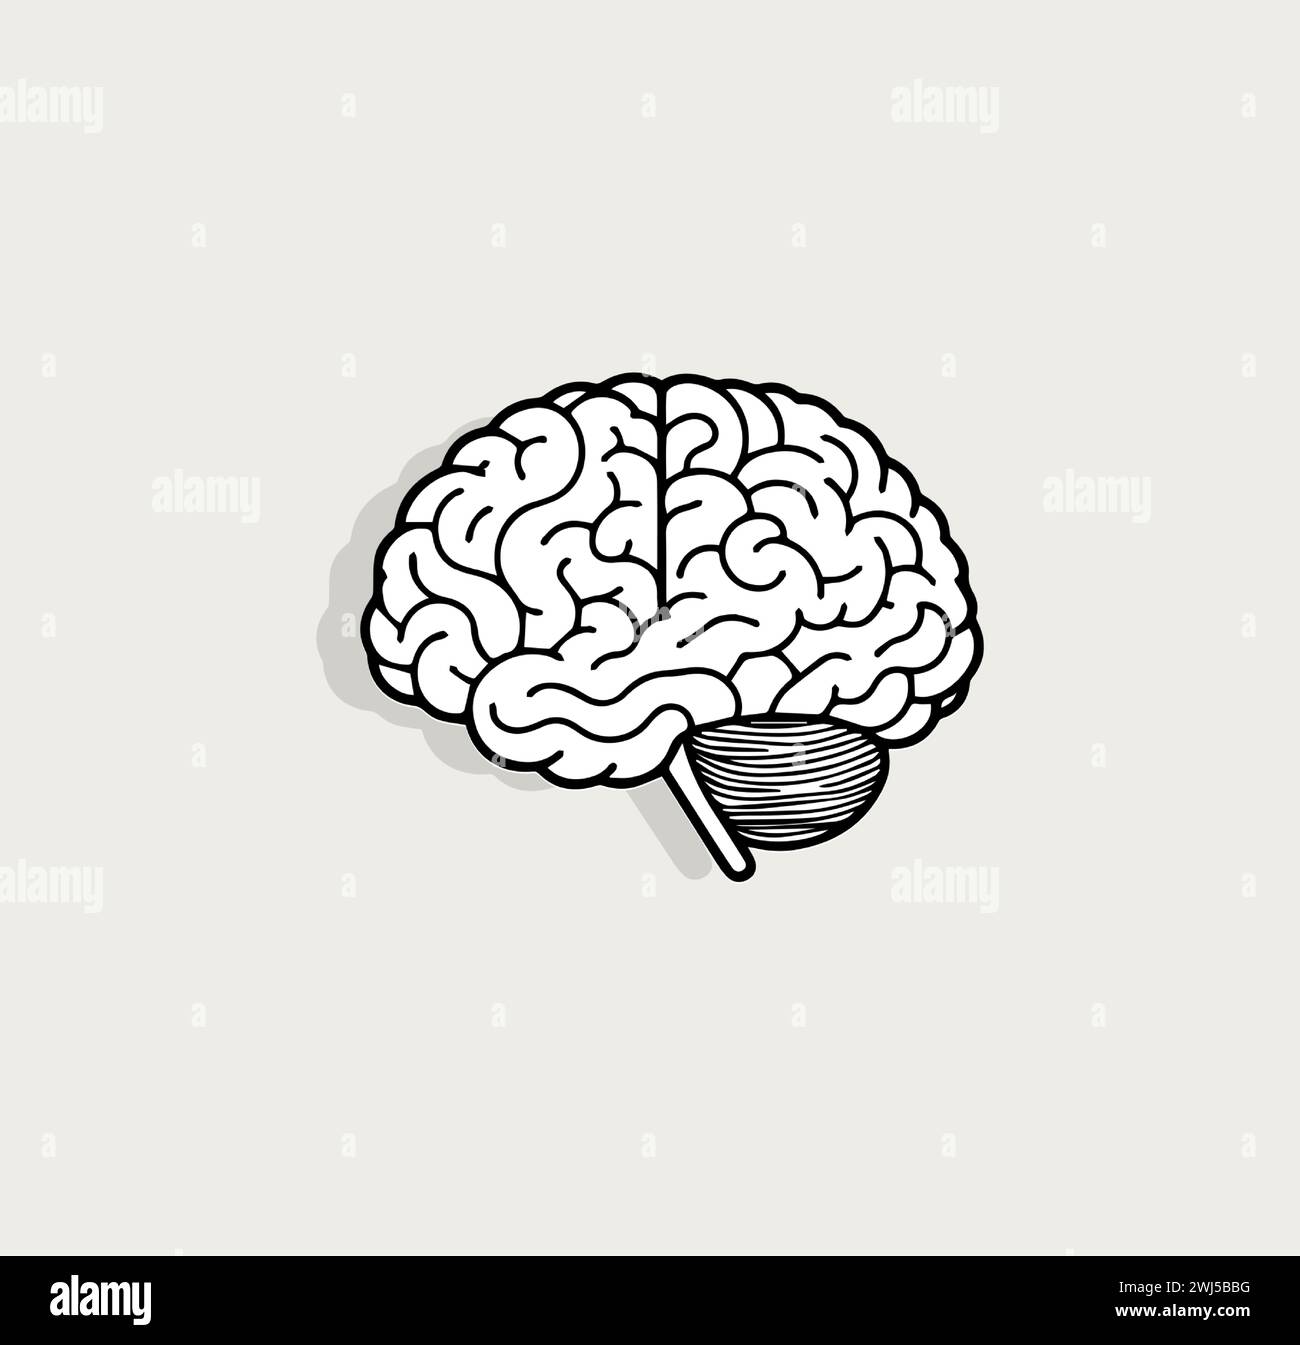 Brain sketch, thought intellect symbol. Mental health awareness, cognitive functions, intelligence assessments icon for educational and psychology Stock Vector